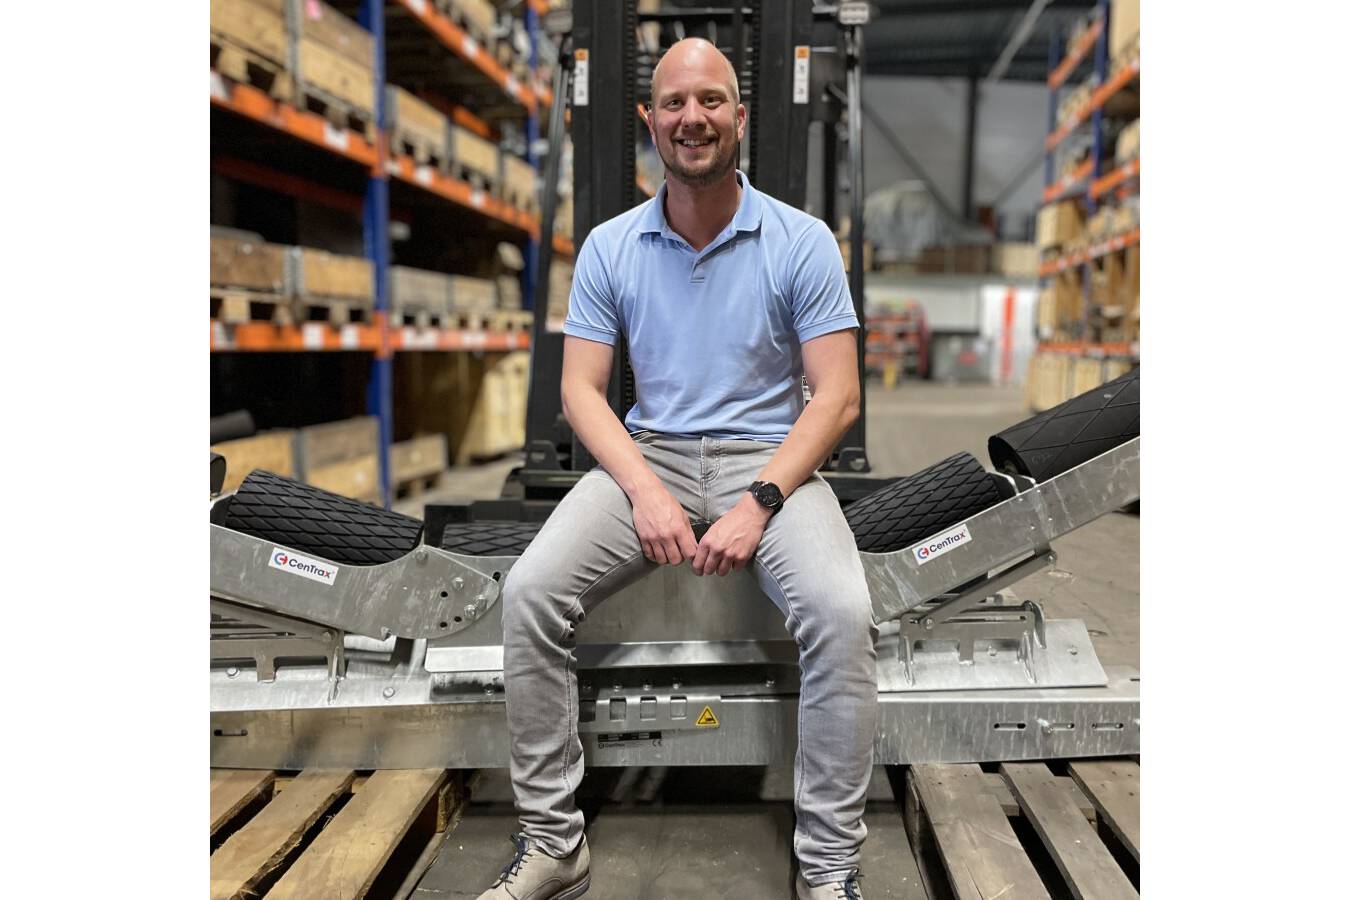 New Operations Manager Stefan Huijser on board at TBK Group In June Stefan Huijser (40) started his new challenge as operations manager at TBK Group. With an background in engineering and a lot of enthusiasm, Stefan is ready to take operational processes to the next level.